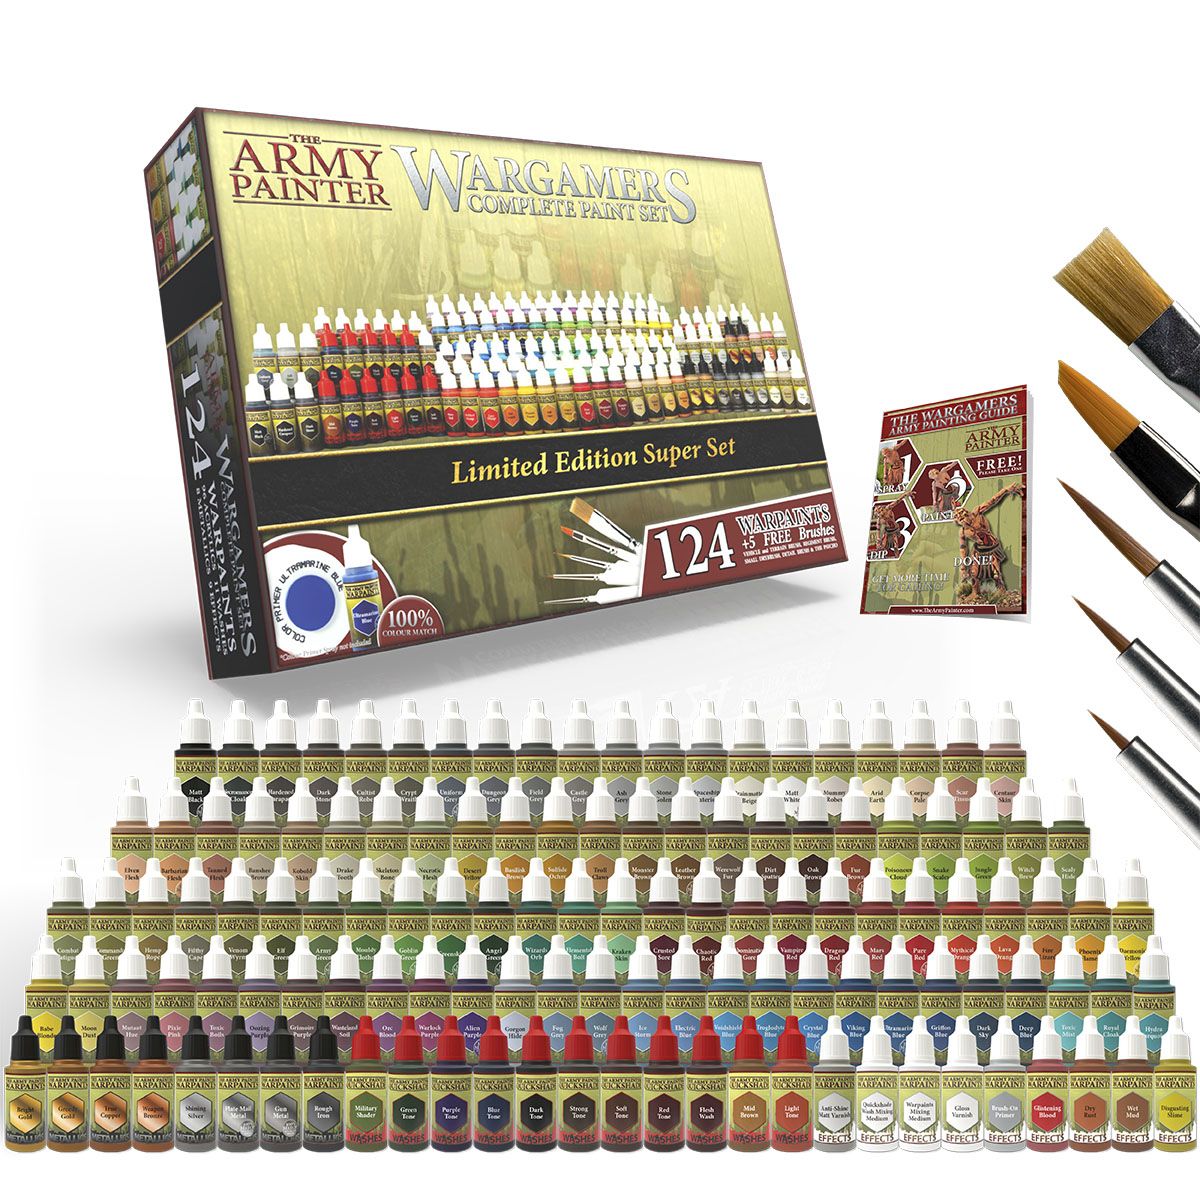 The Army Painter: Manufacturer of miniatures & wargaming paint